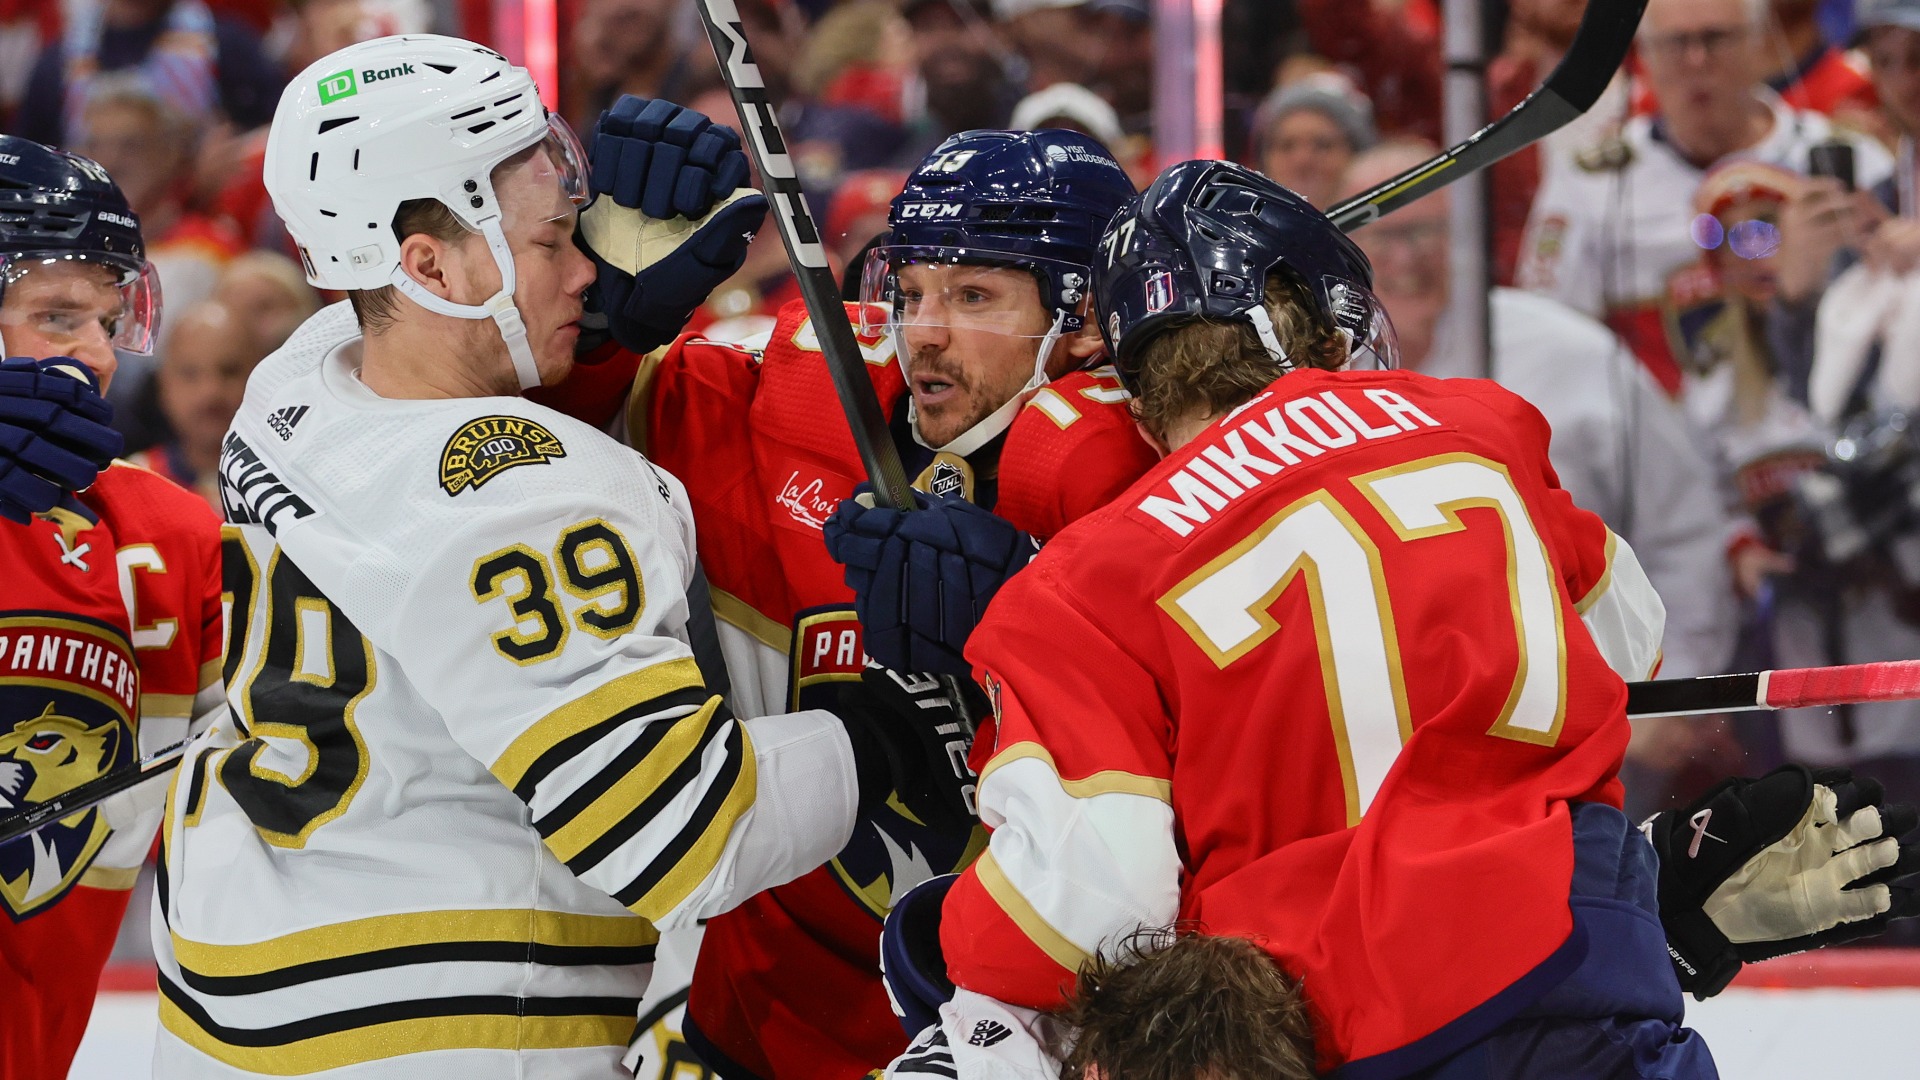 Do Bruins Anticipate Spill Over After Third-Period Melee In Game 2?